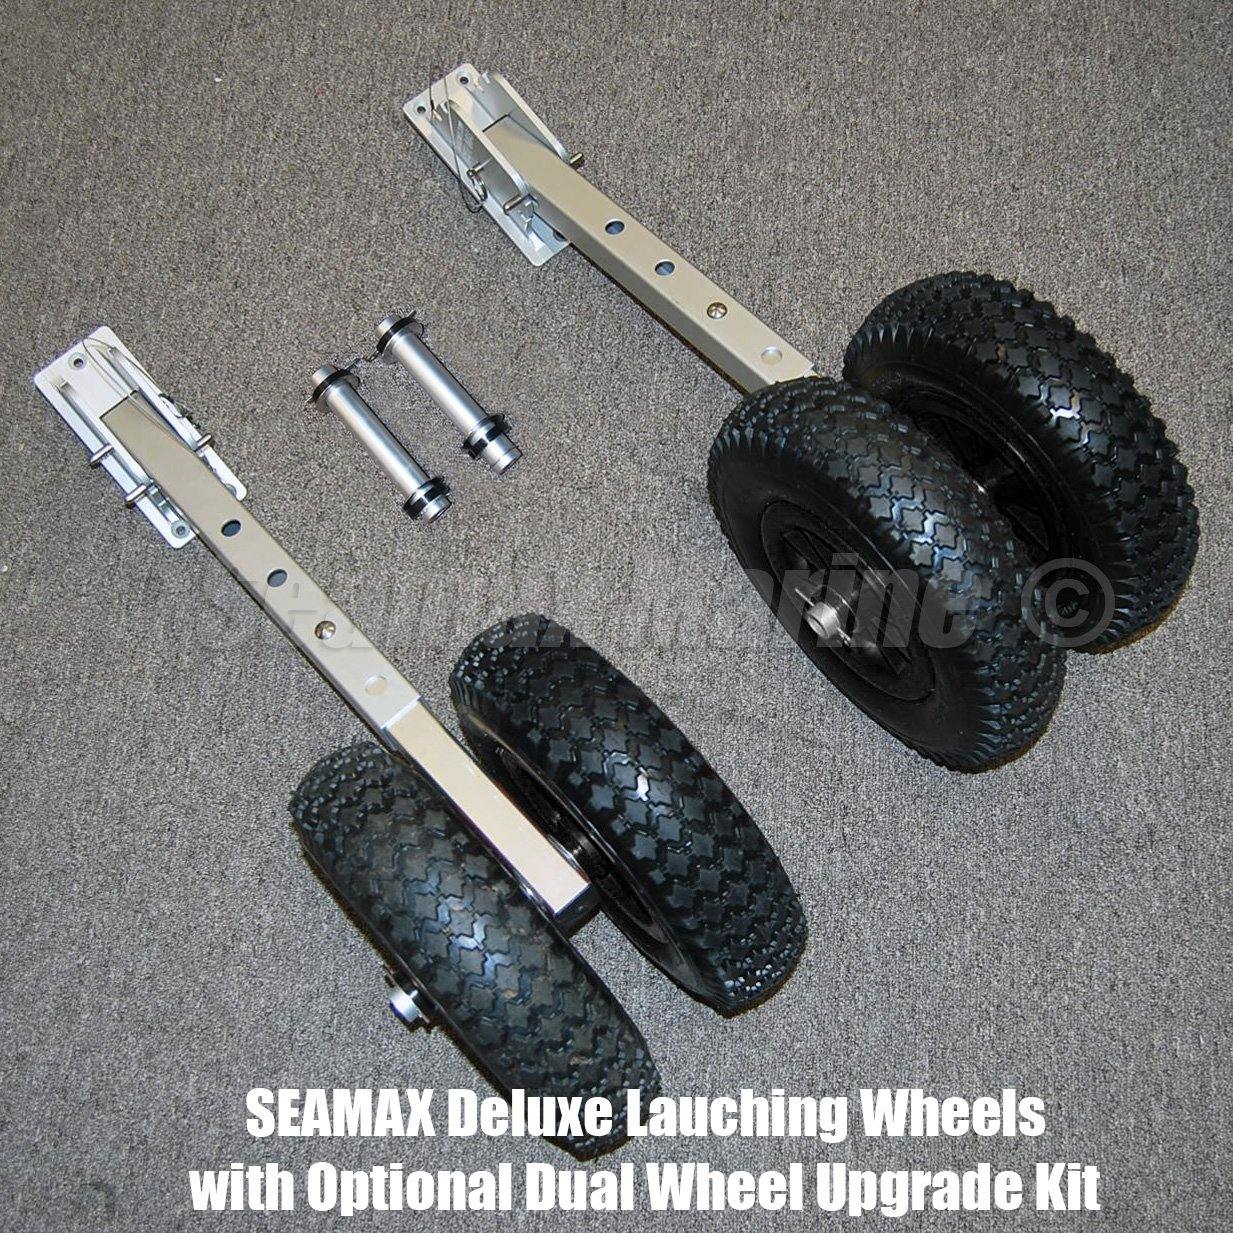 14" Dual Wheel Upgrade Kit for Seamax Deluxe Boat Launching Wheels - Good for 2019 or Later Version